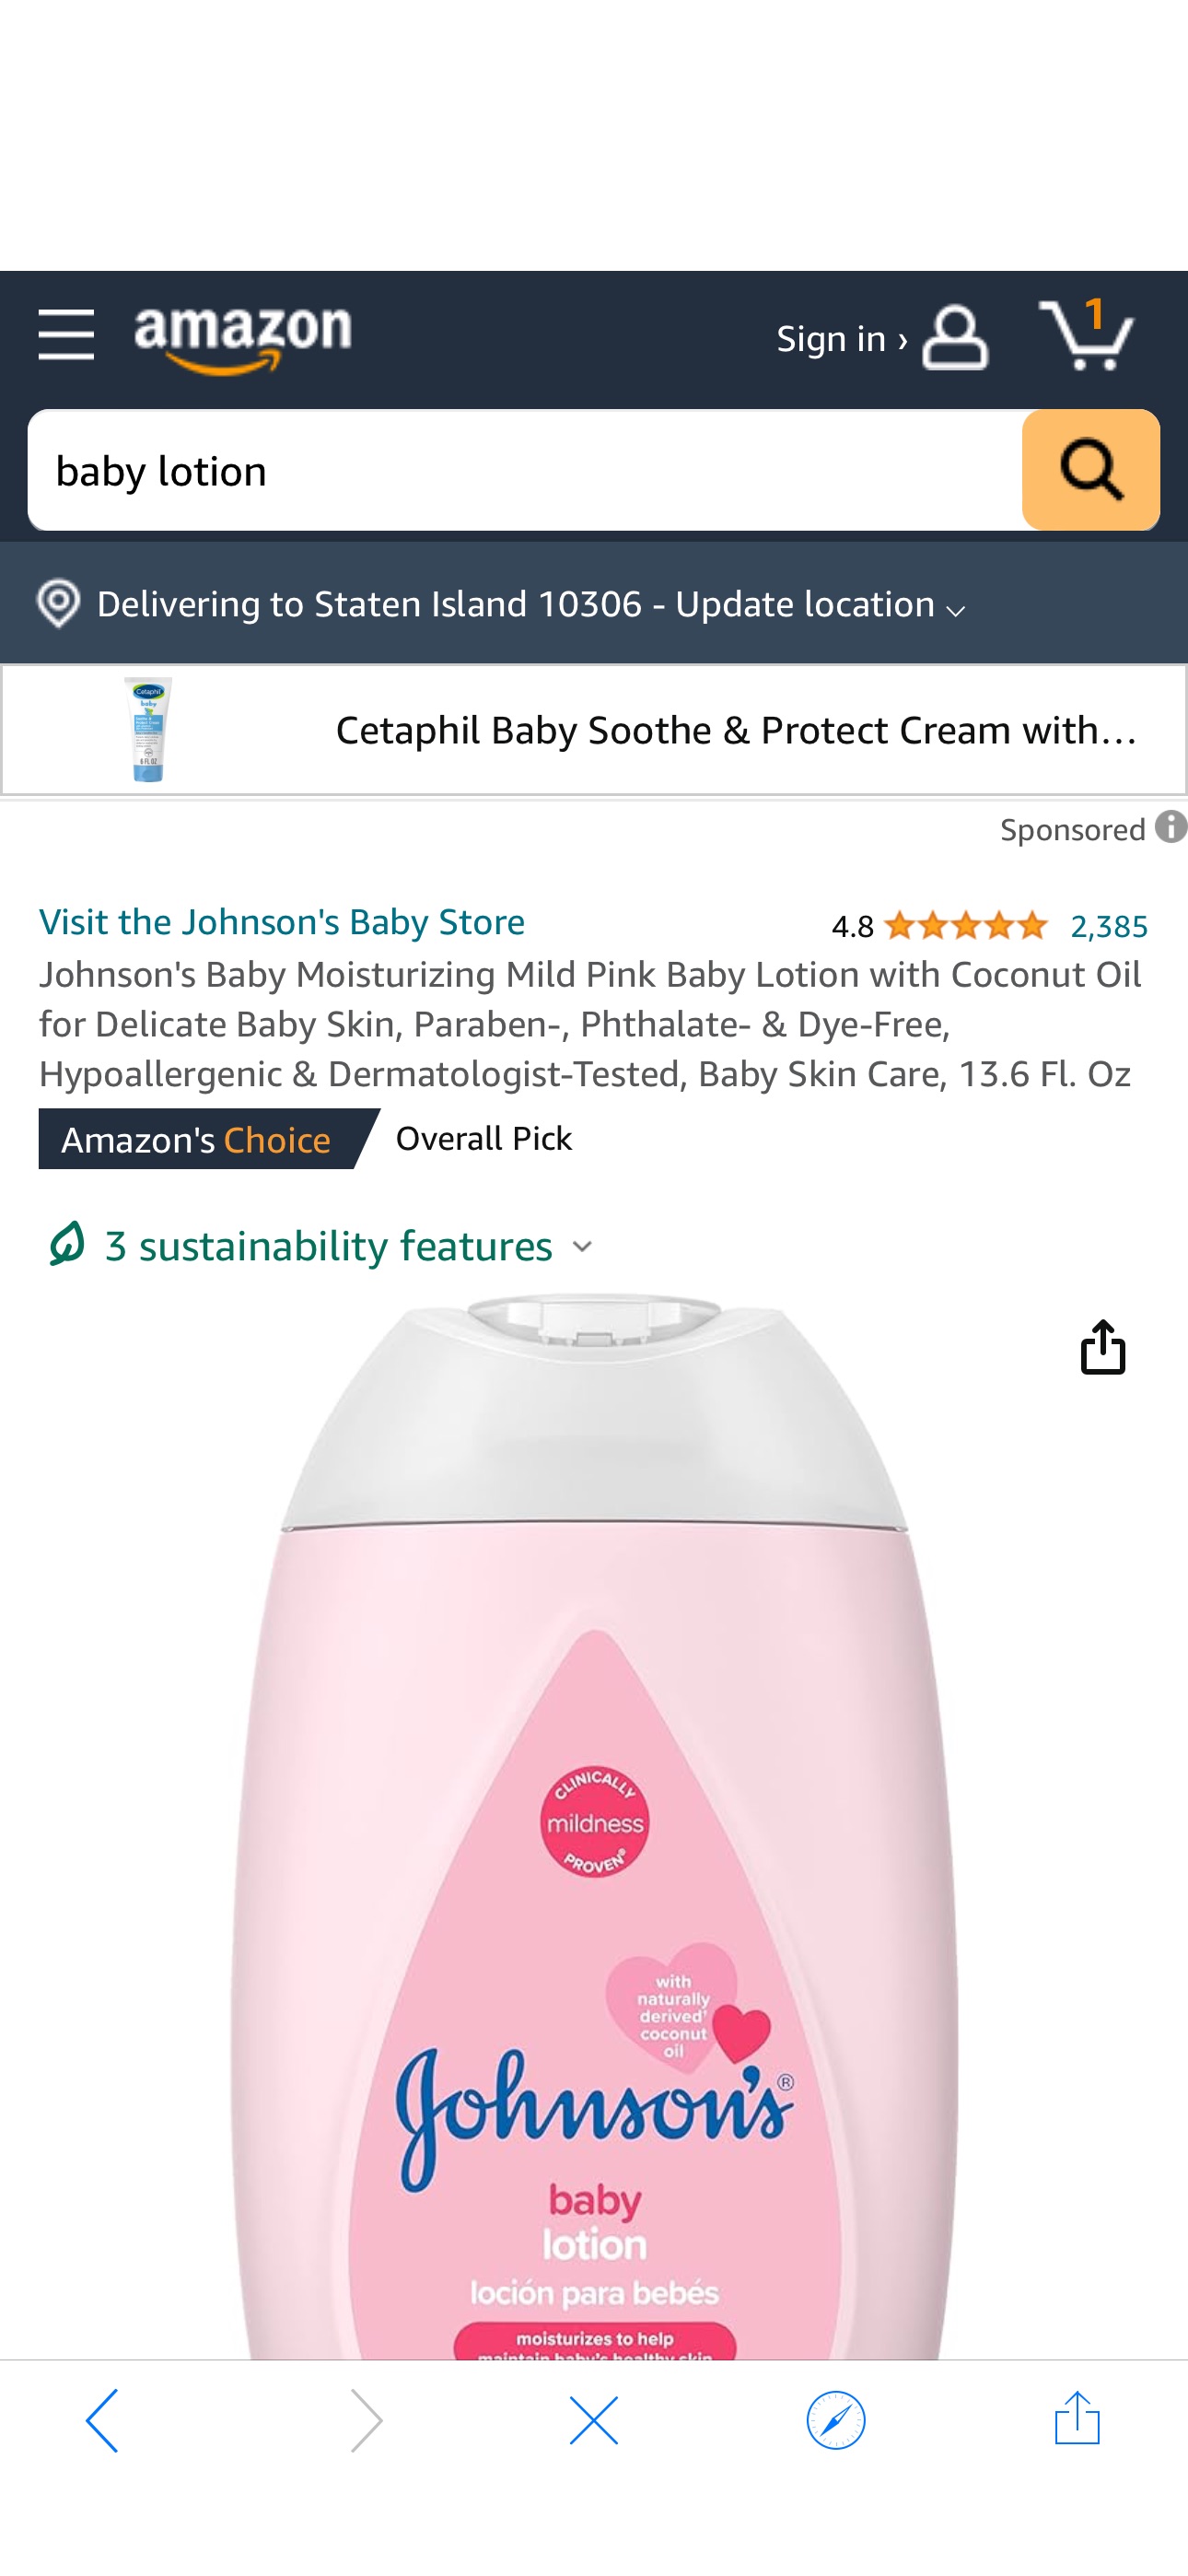 Amazon.com: Johnson's Baby Moisturizing Mild Pink Baby Lotion with Coconut Oil for Delicate Baby Skin, Paraben-, Phthalate- & Dye-Free, Hypoallergenic & Dermatologist-Tested, Baby Skin Care, 13.6 Fl. 